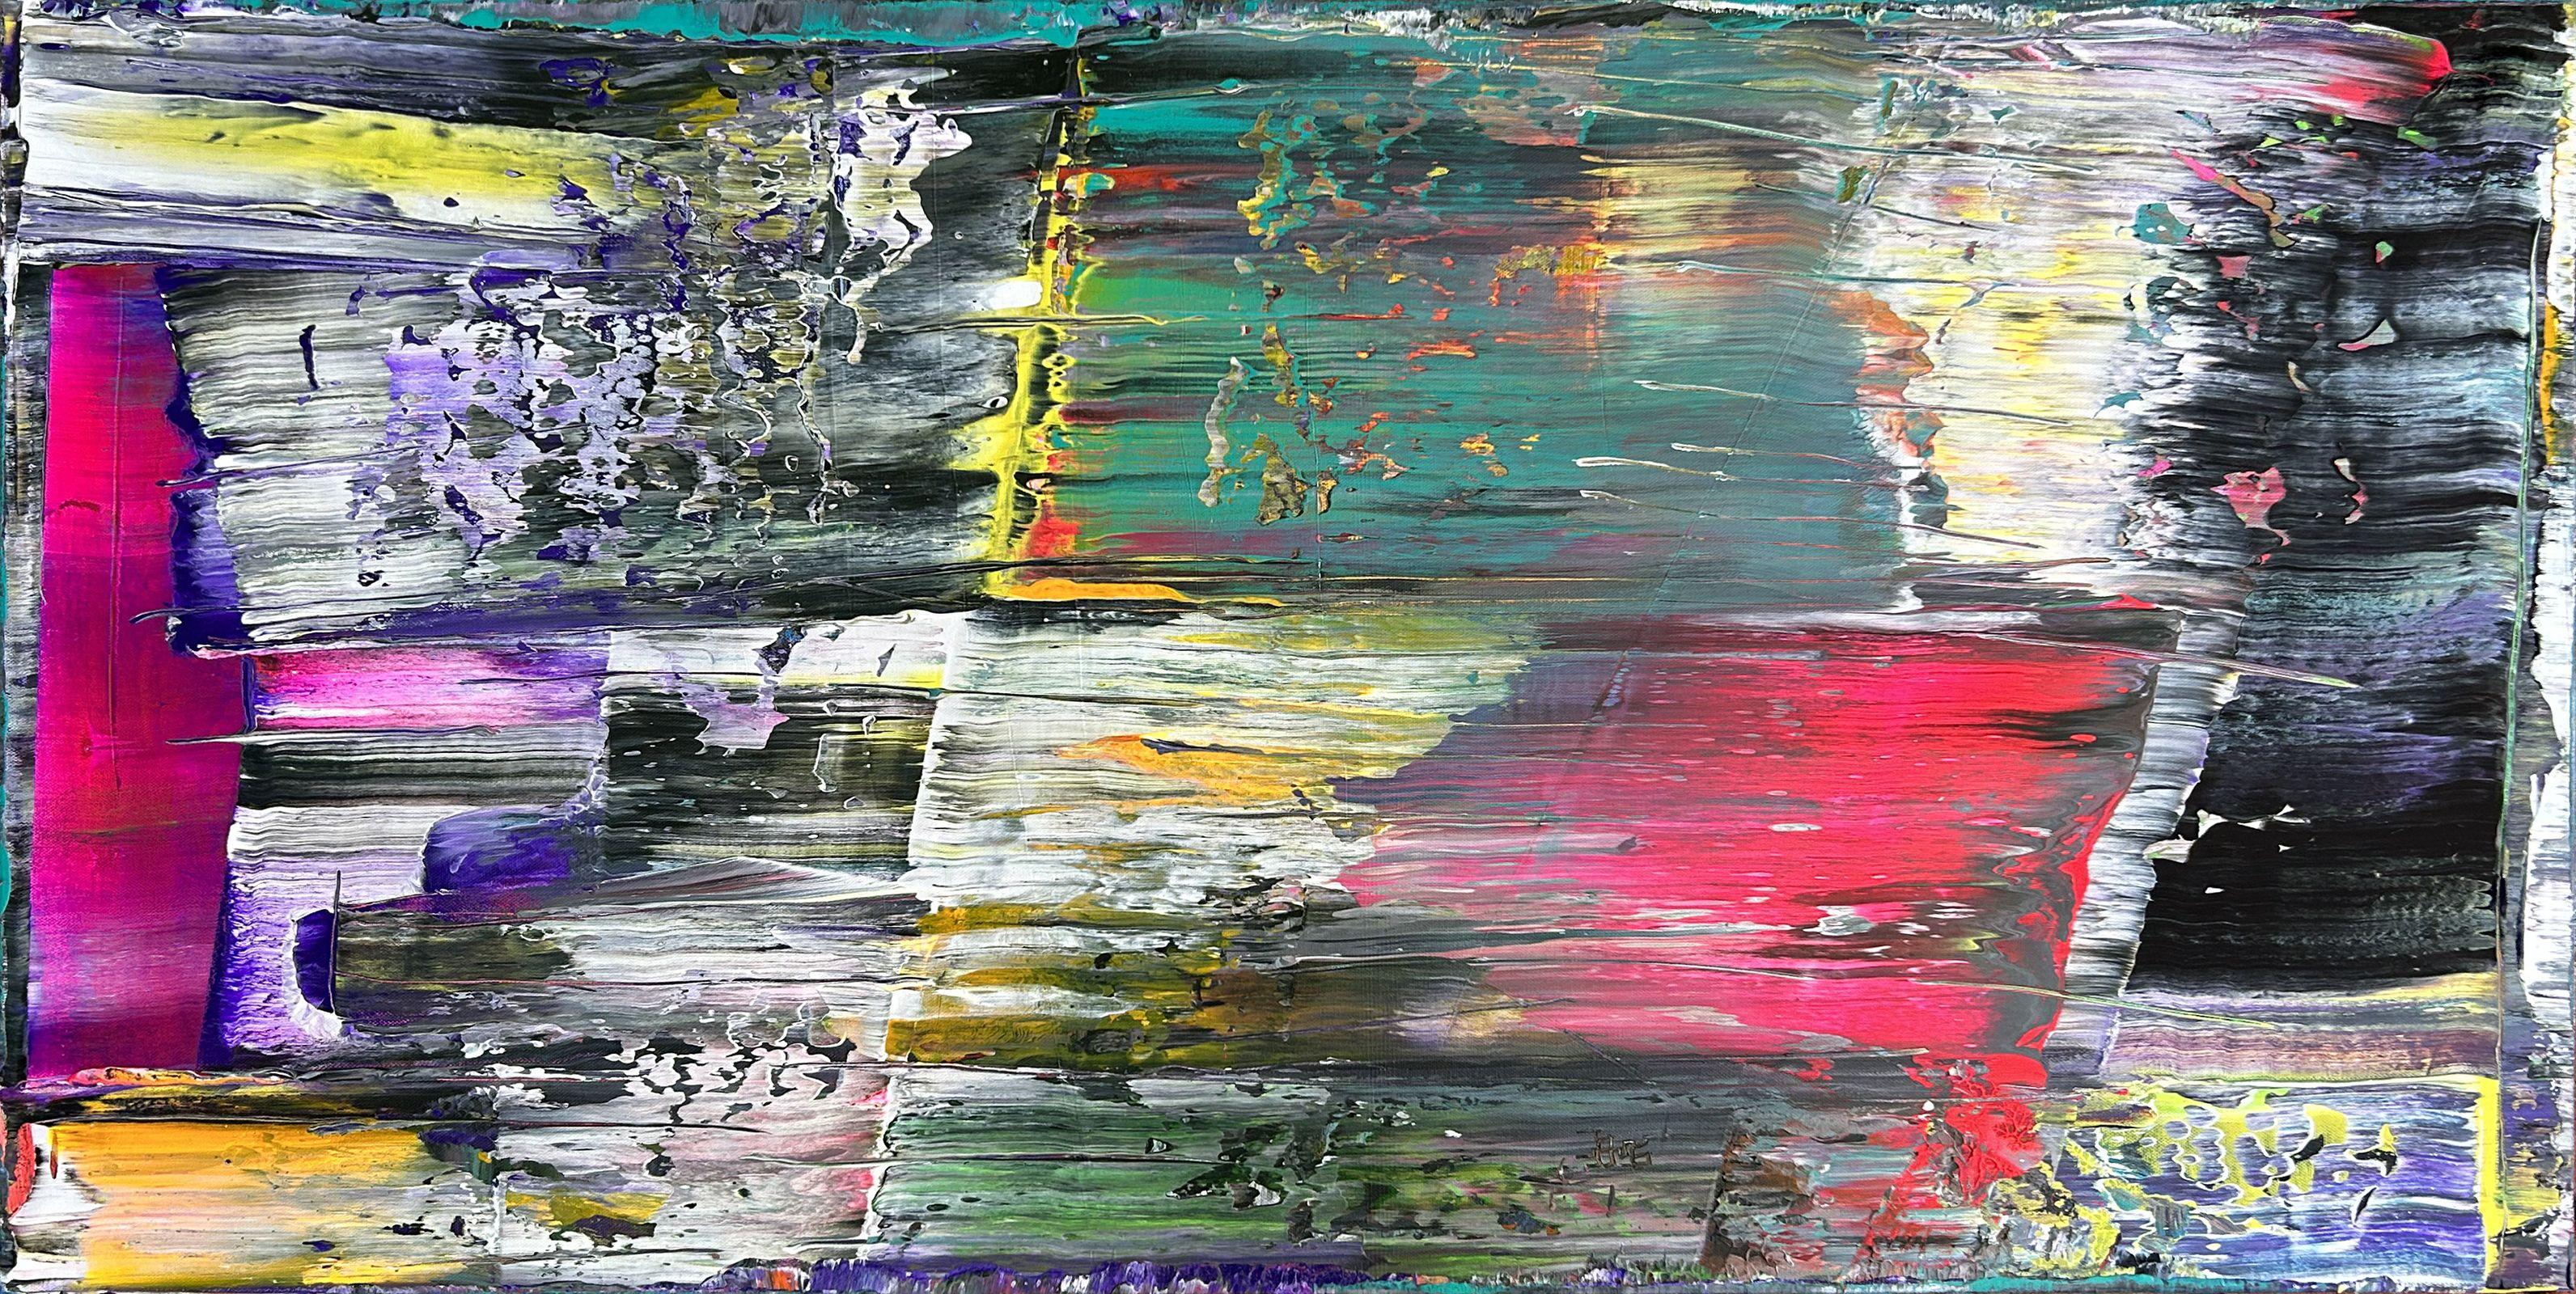 This is a gallery quality, PMS abstract acrylic painting for your home or office. This piece has a beautiful, modern and energetic design aesthetic. The colors streak and overlap, while also being contrasted extreme texture and color shifts, as well